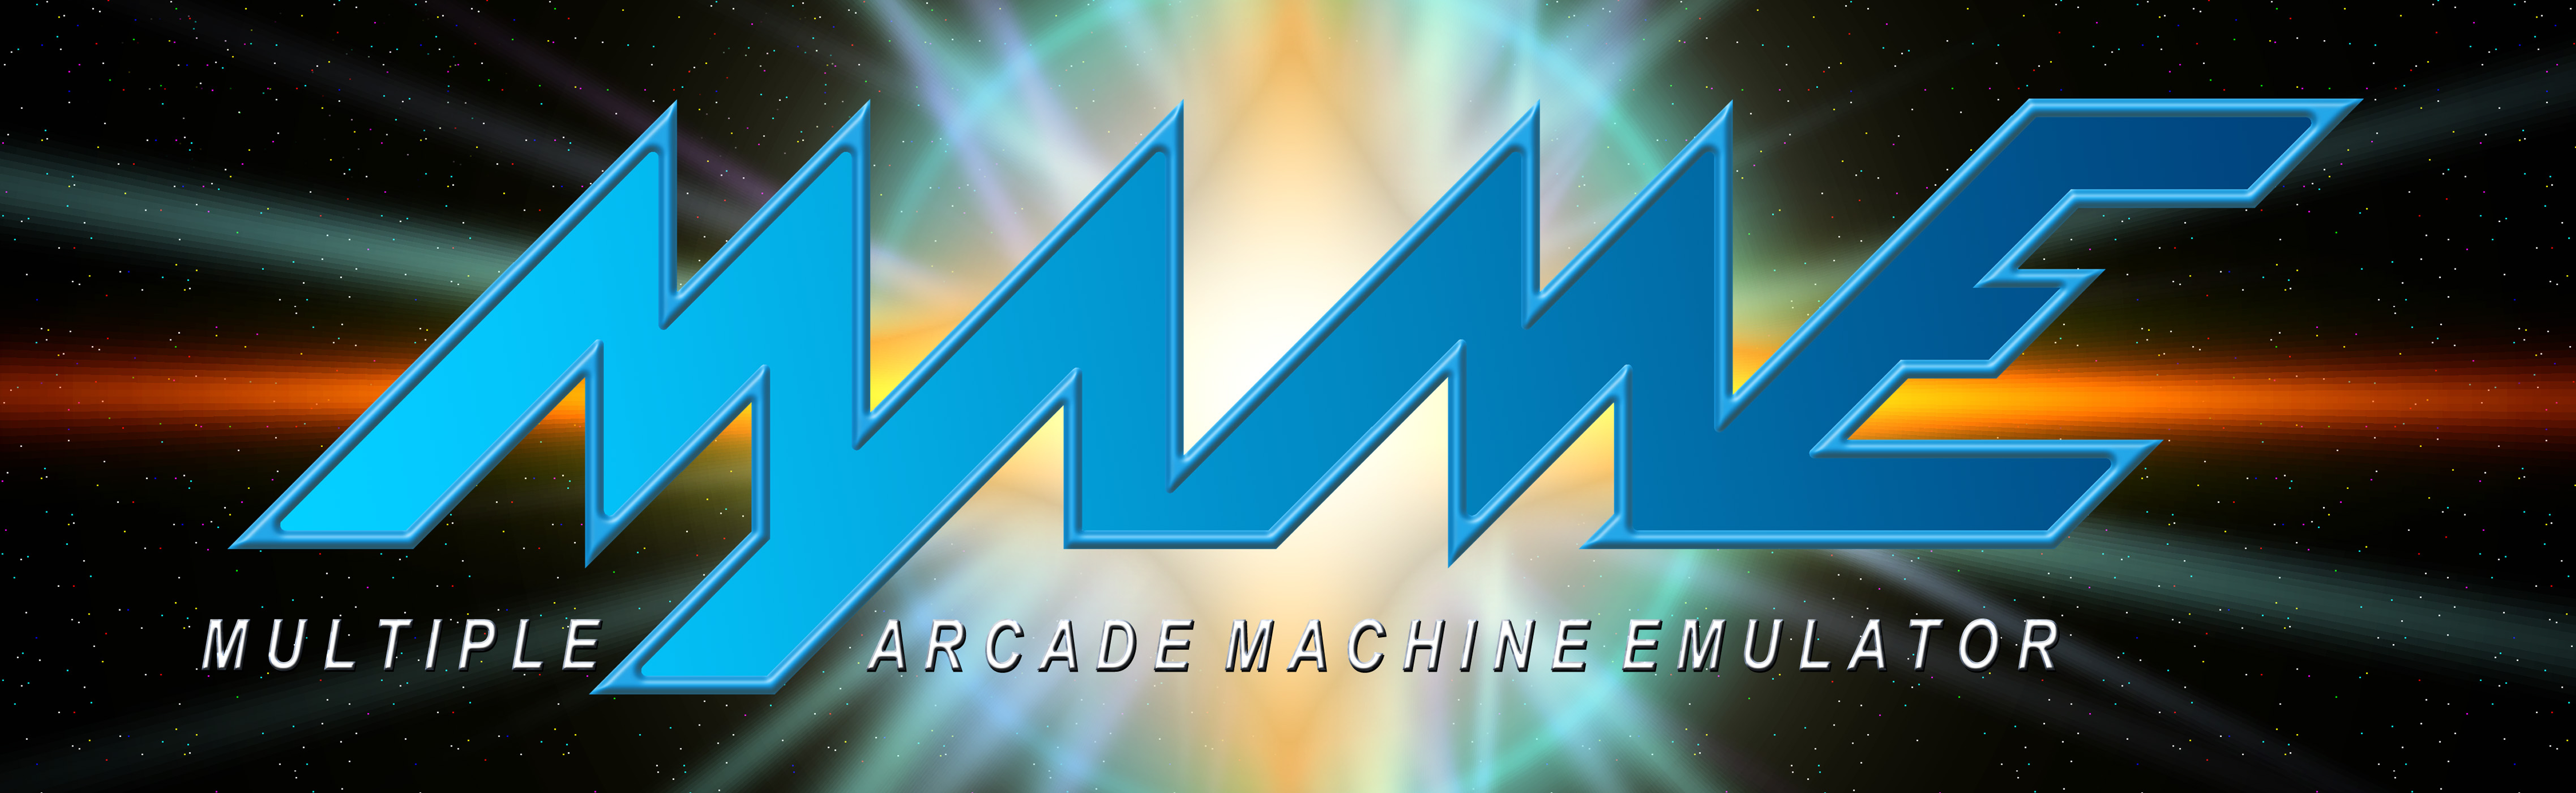 Marquee Image For Mame Arcade Cabinet Construction Project